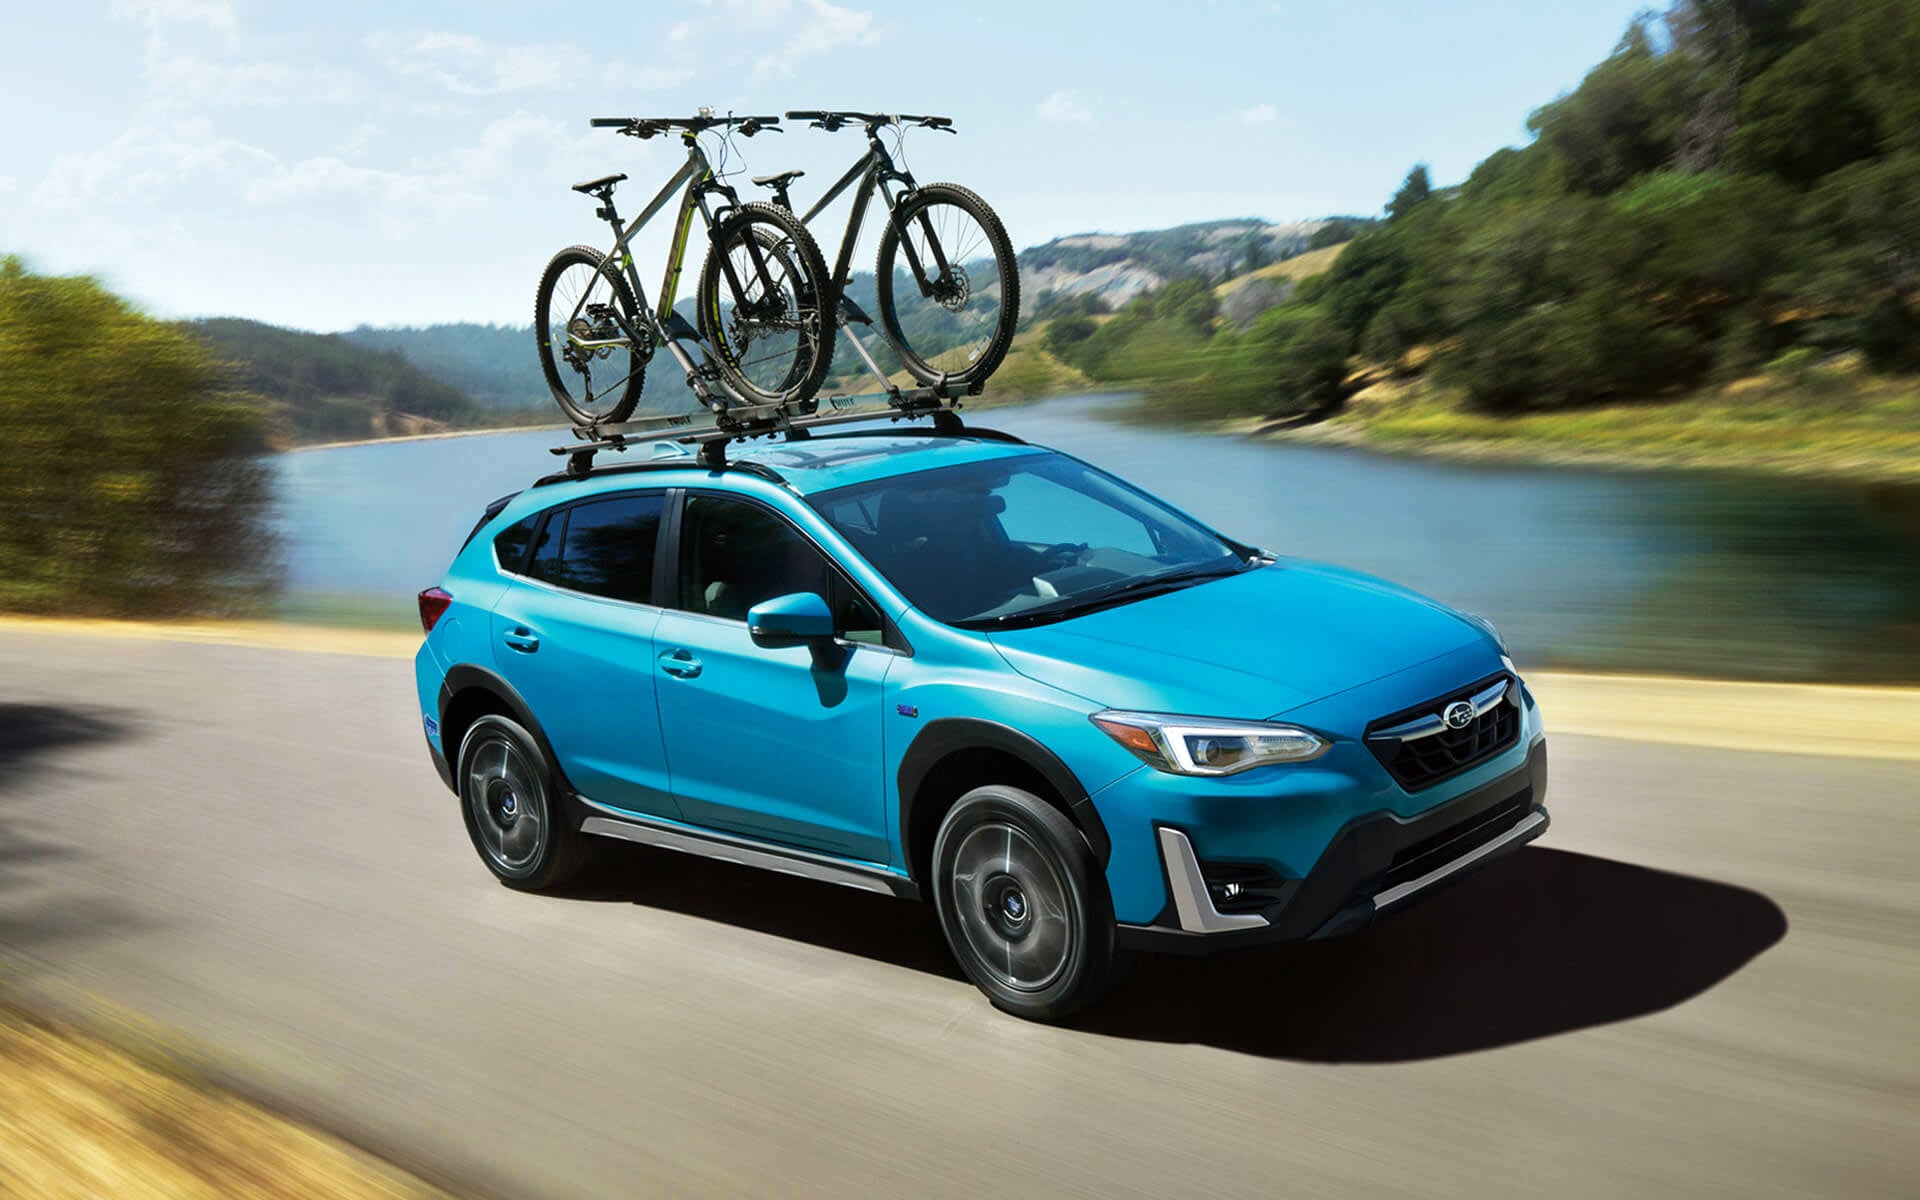 A blue Crosstrek Hybrid with two bicycles on its roof rack driving beside a river | Island Subaru in Staten Island NY